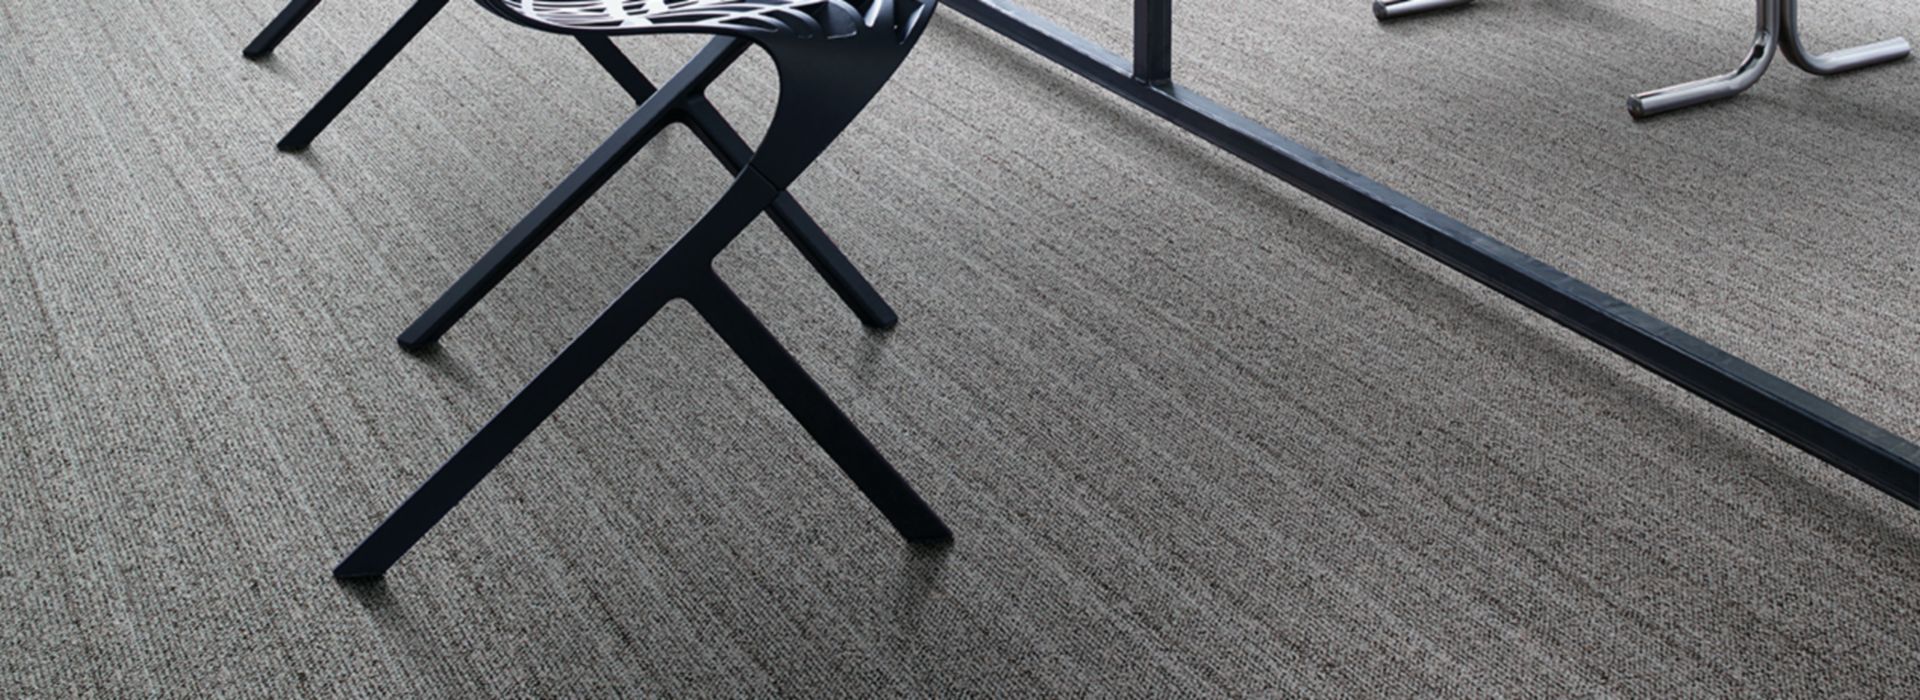 Interface WW860 plank carpet tile in work area with table and chairs